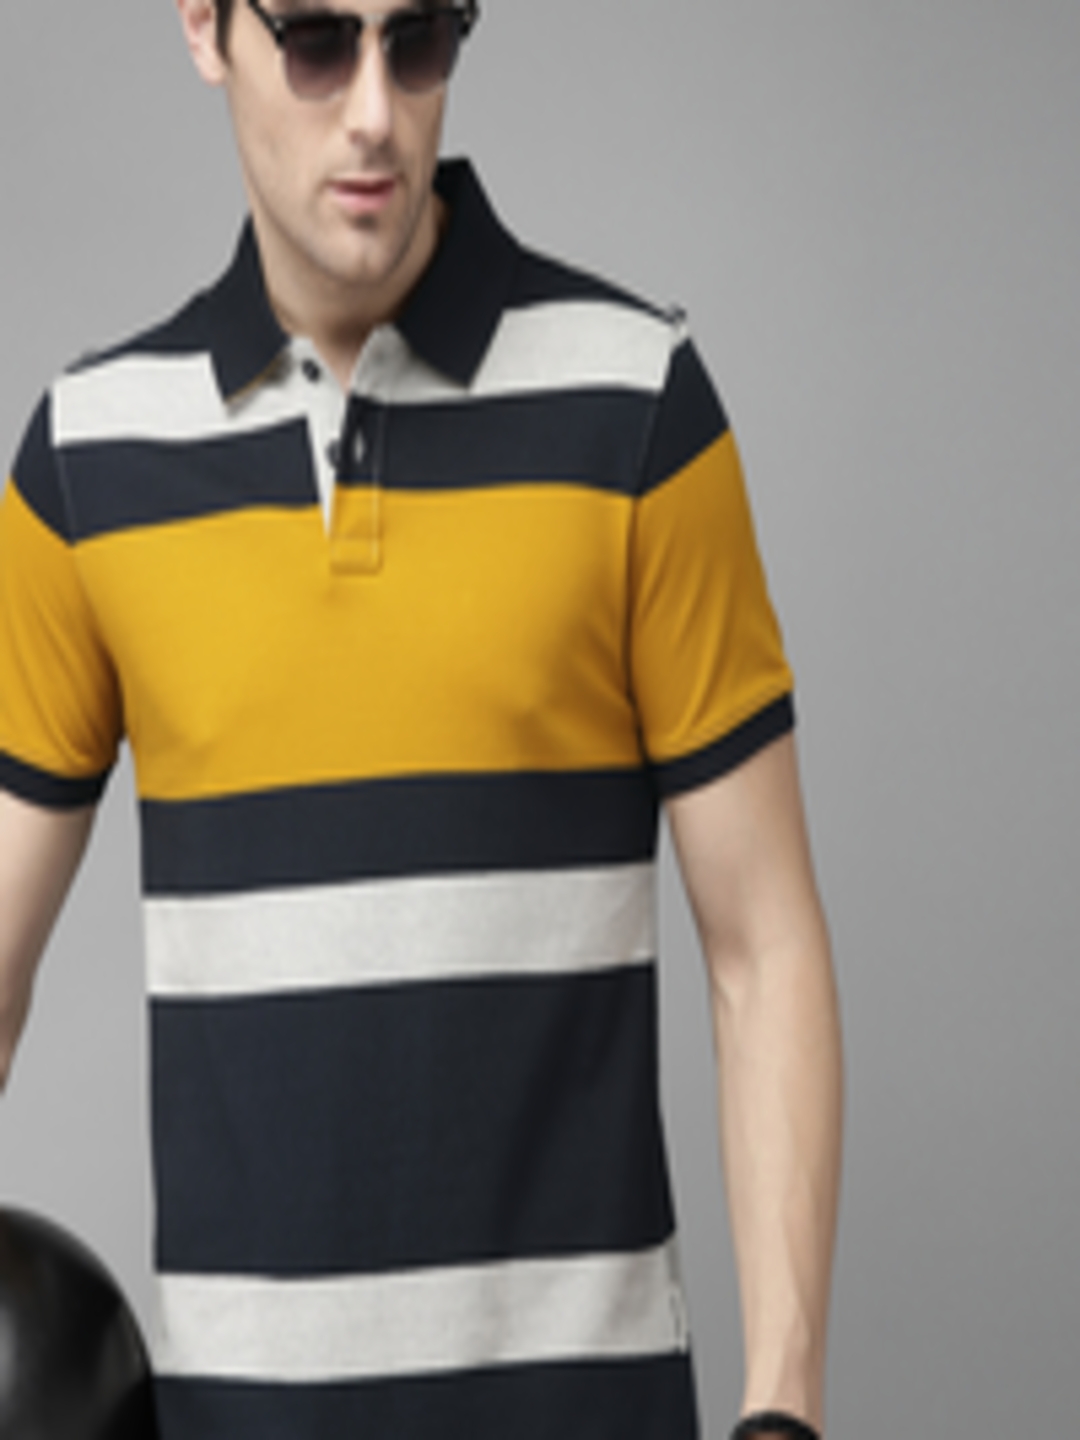 Buy The Roadster Lifestyle Co Men Mustard Yellow Navy Blue Striped Polo ...